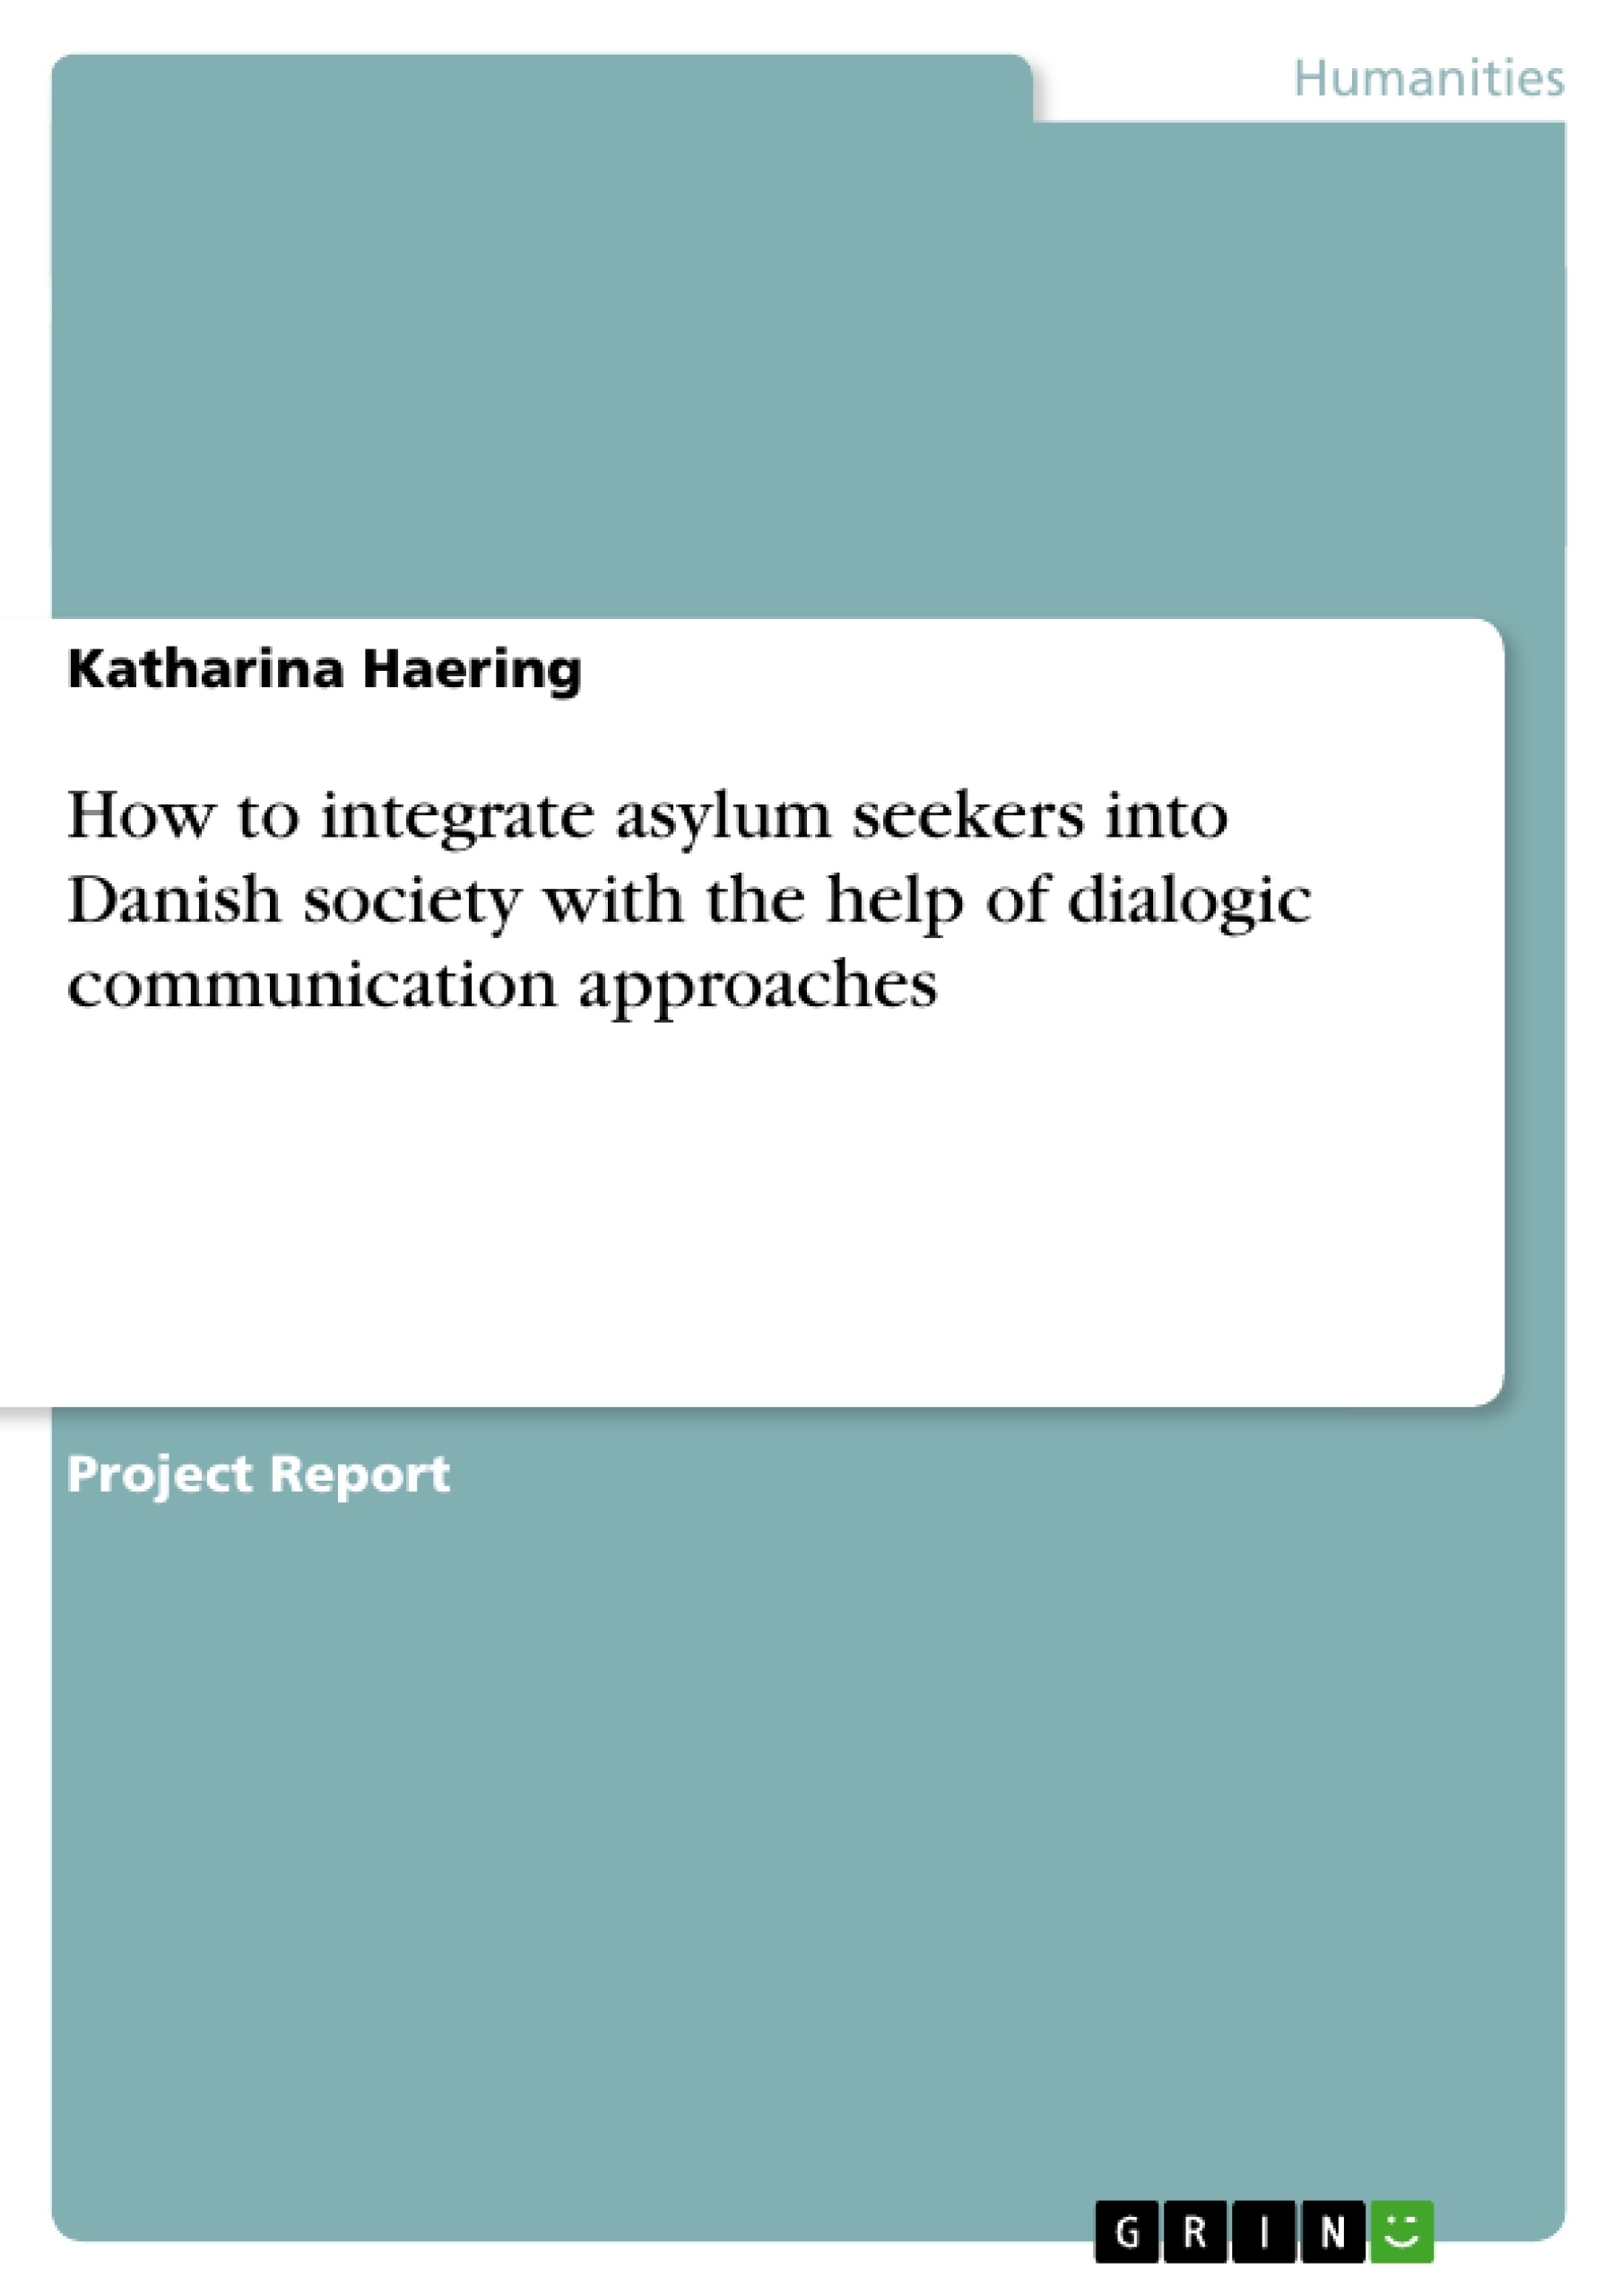 Title: How to integrate asylum seekers into Danish society with the help of dialogic communication approaches